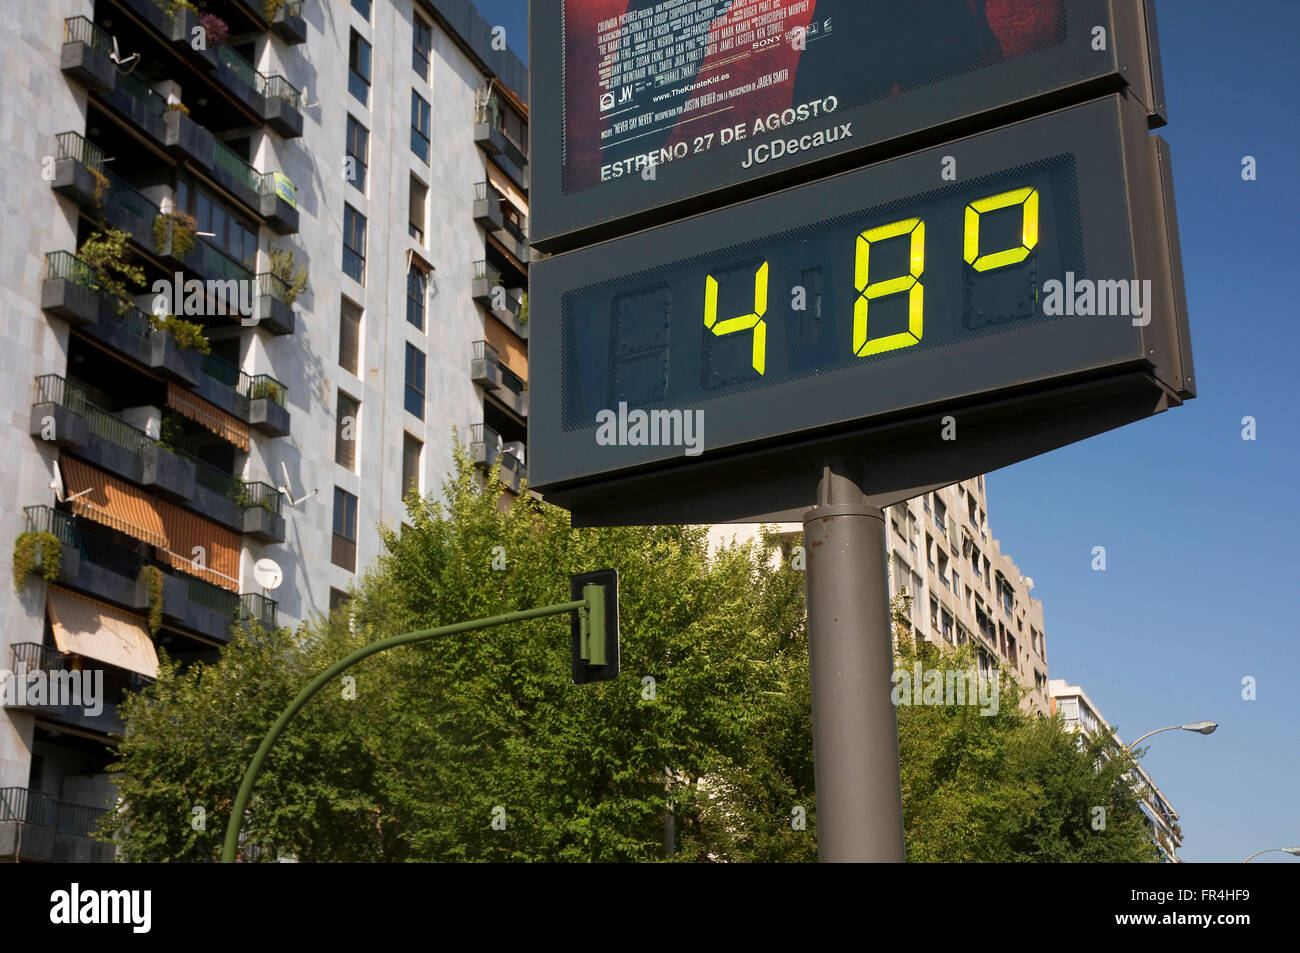 Urban thermometer, Extreme temperature, Digital scoreboard, Seville, Region of Andalusia, Spain, Europe Stock Photo